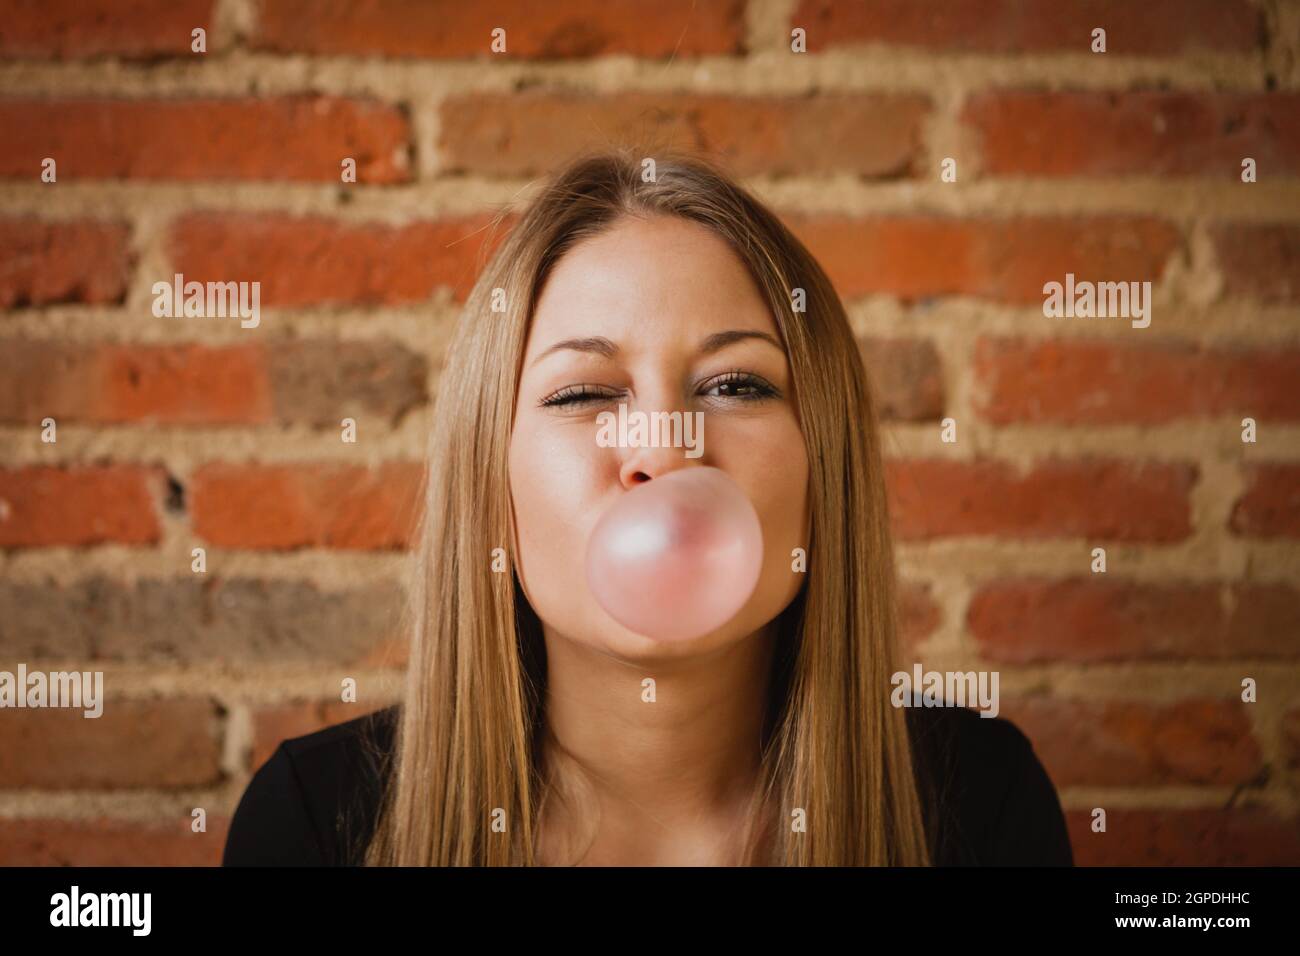 Funny girl making a pomp with a bubble gum and a brick wall of background Stock Photo